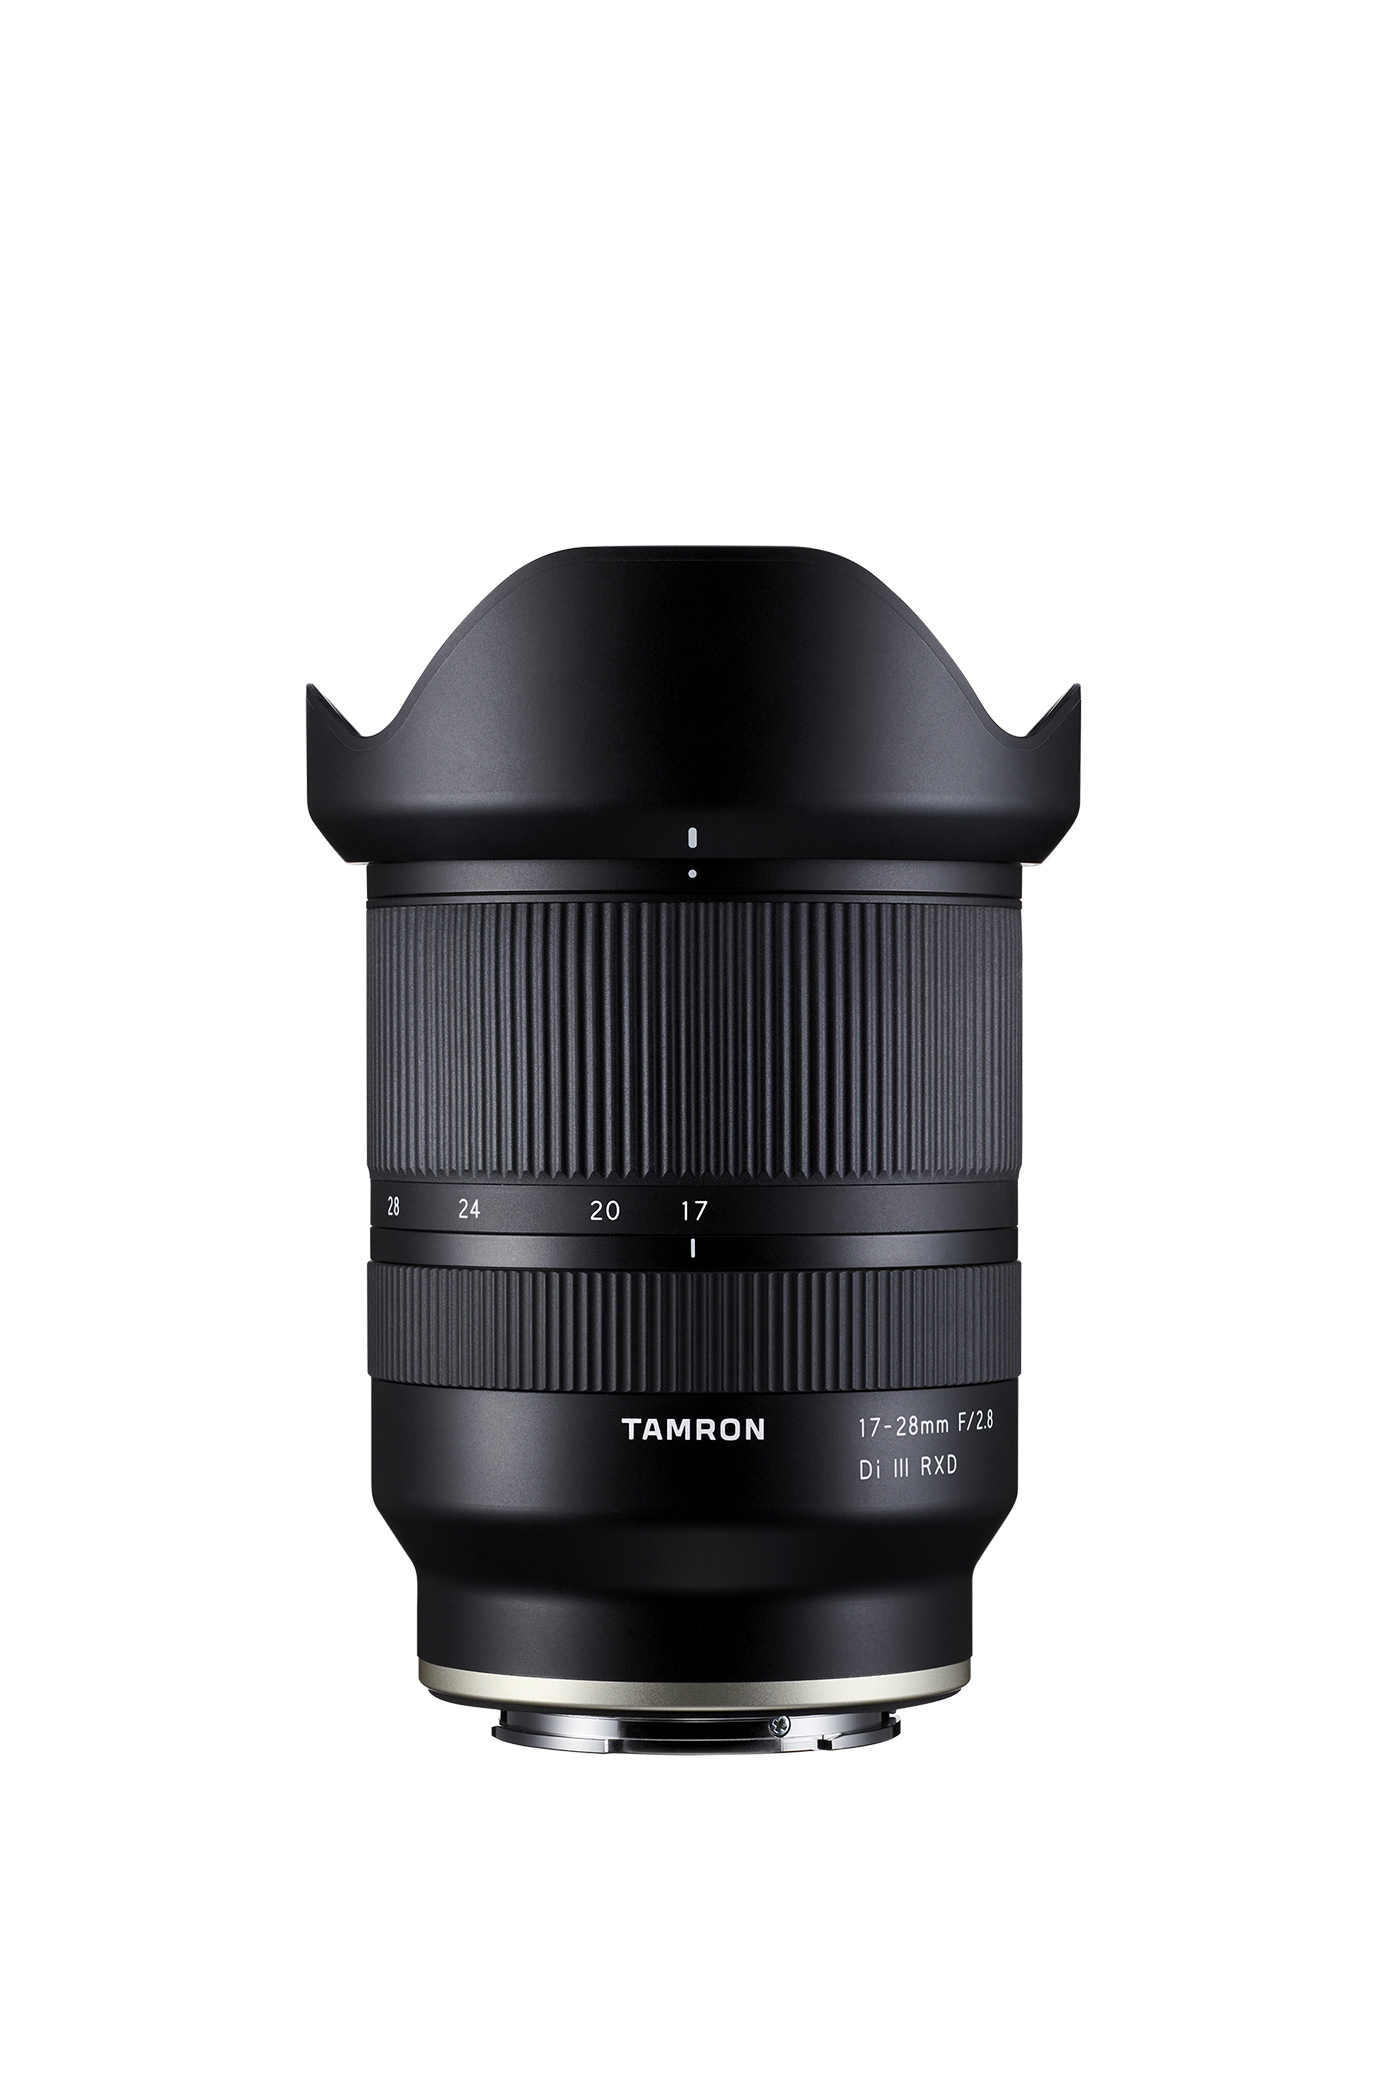 Tamron 17-28mm F/2.8 Di III RXD for Sony E mount | St. Cloud 